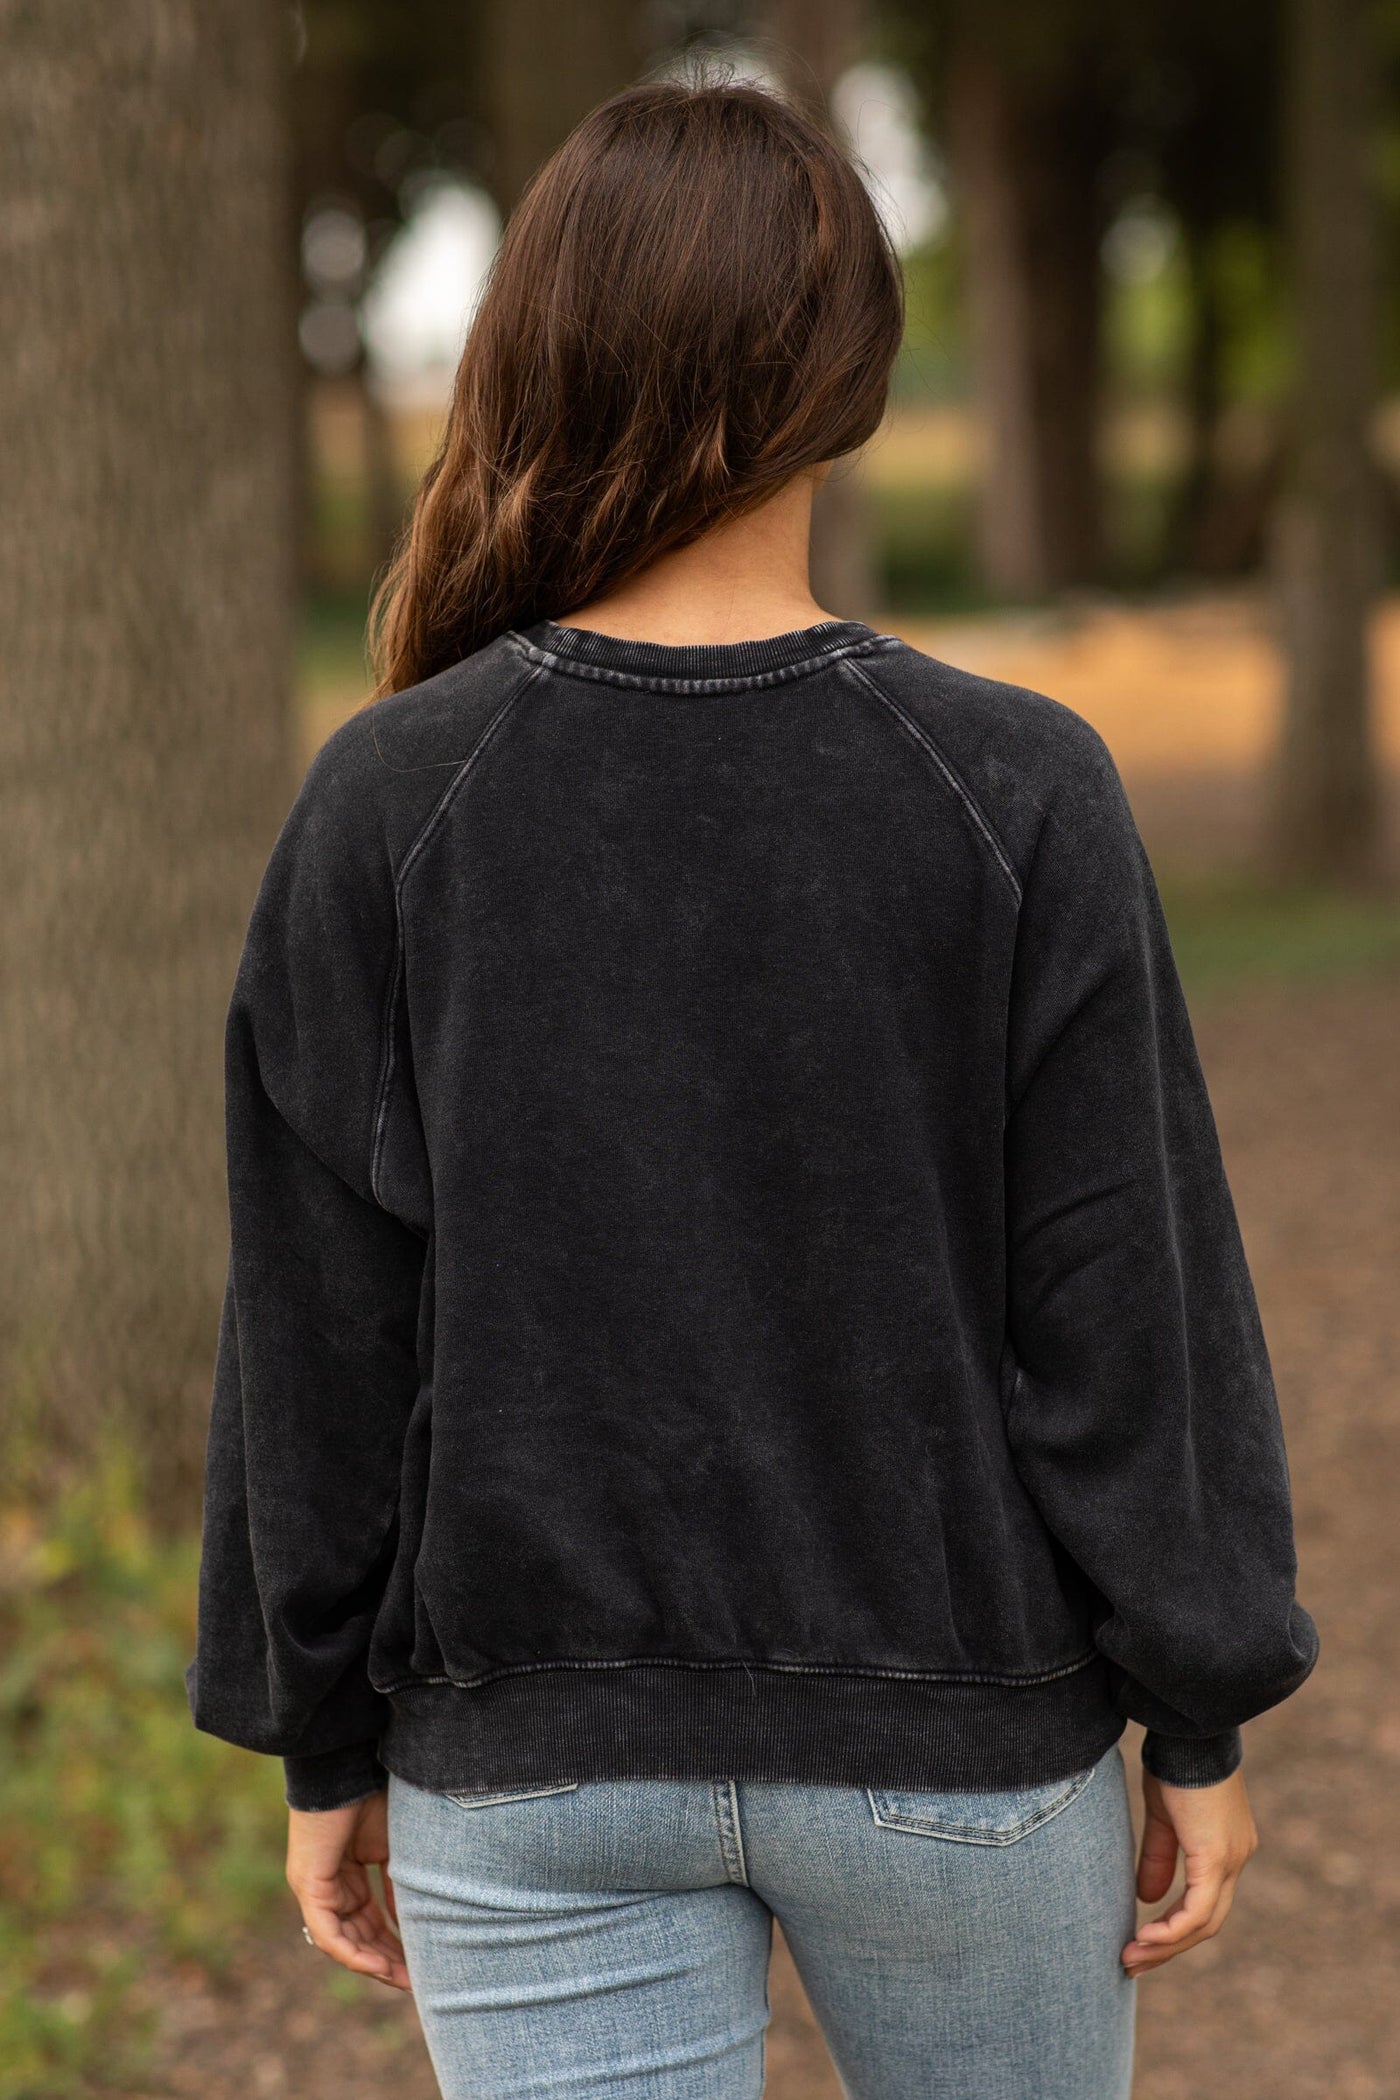 Black Washed Sweatshirt With Seam Detail - Filly Flair